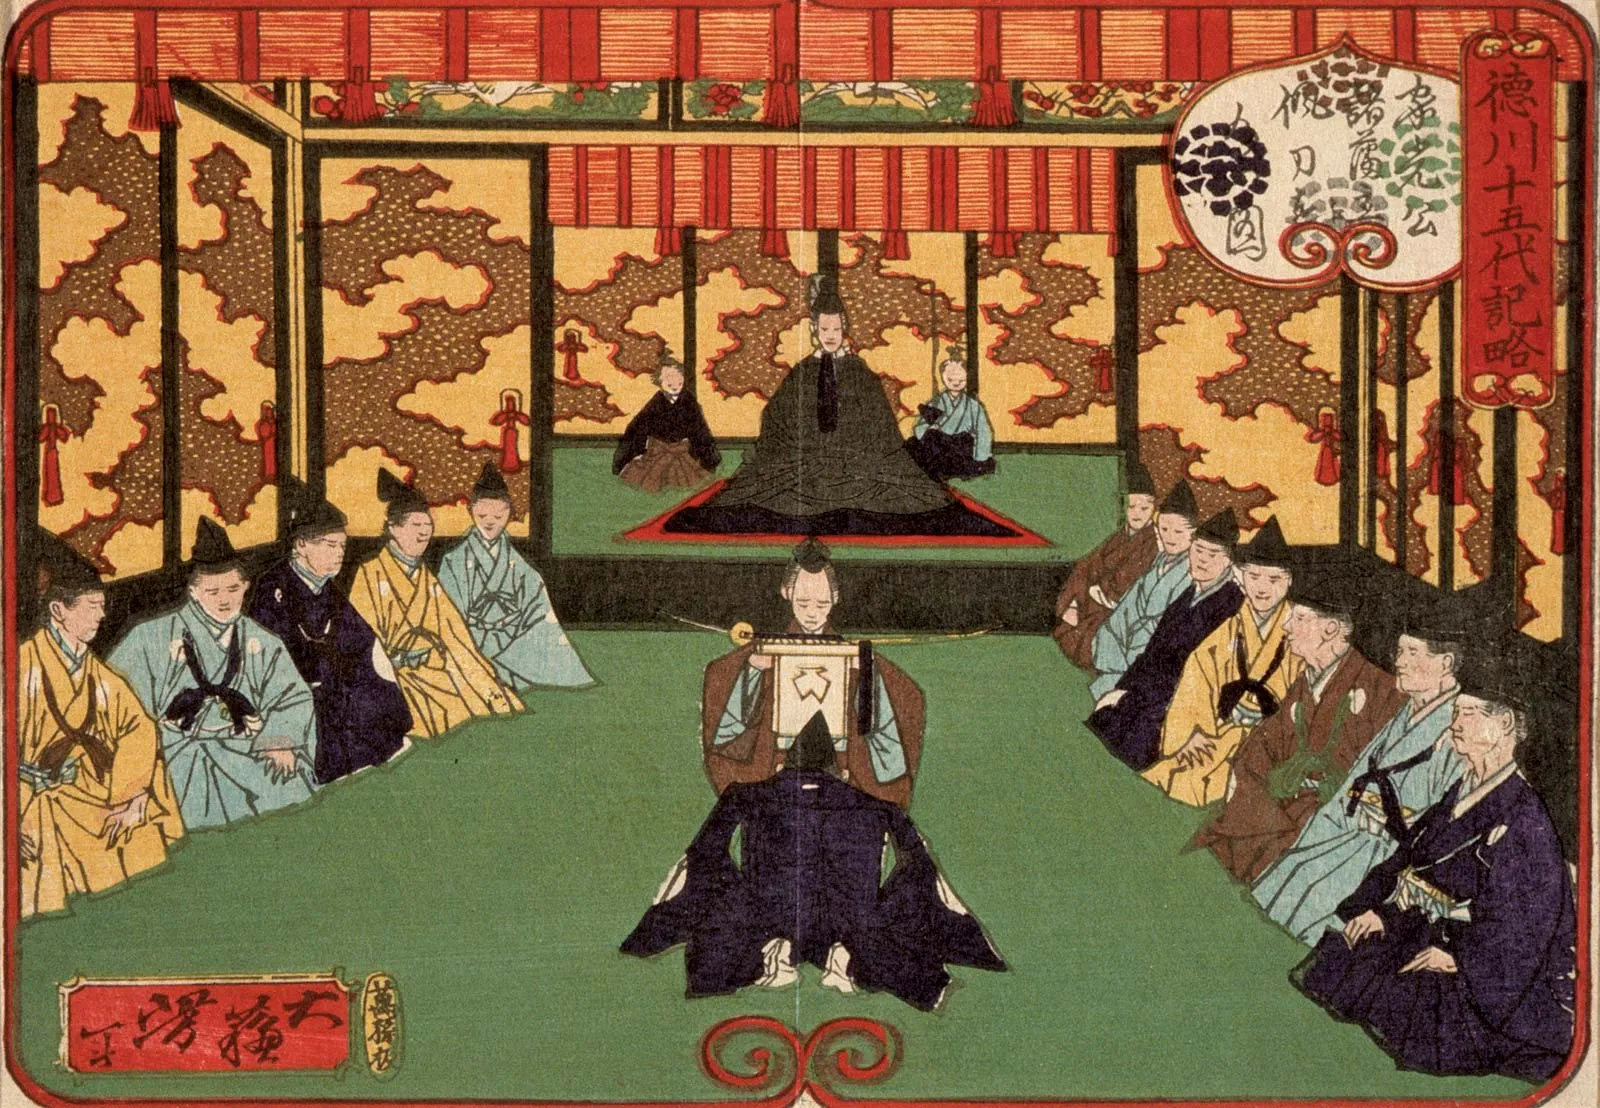 <p>________- Military government that ruled over Japan from 1603 to 1868.</p>